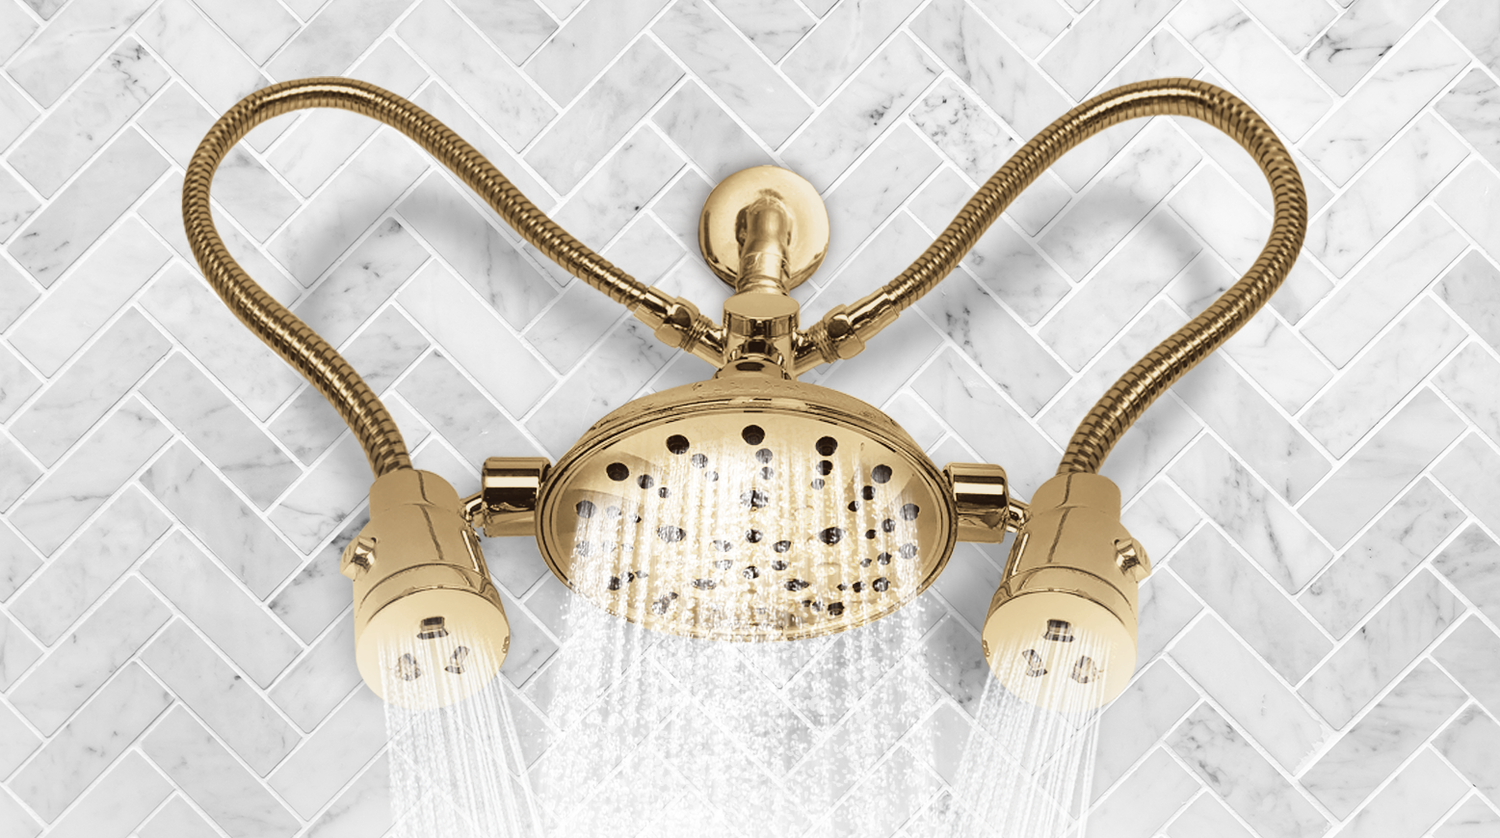 The Omni-Angle Water Massage Shower Head with a three-head design